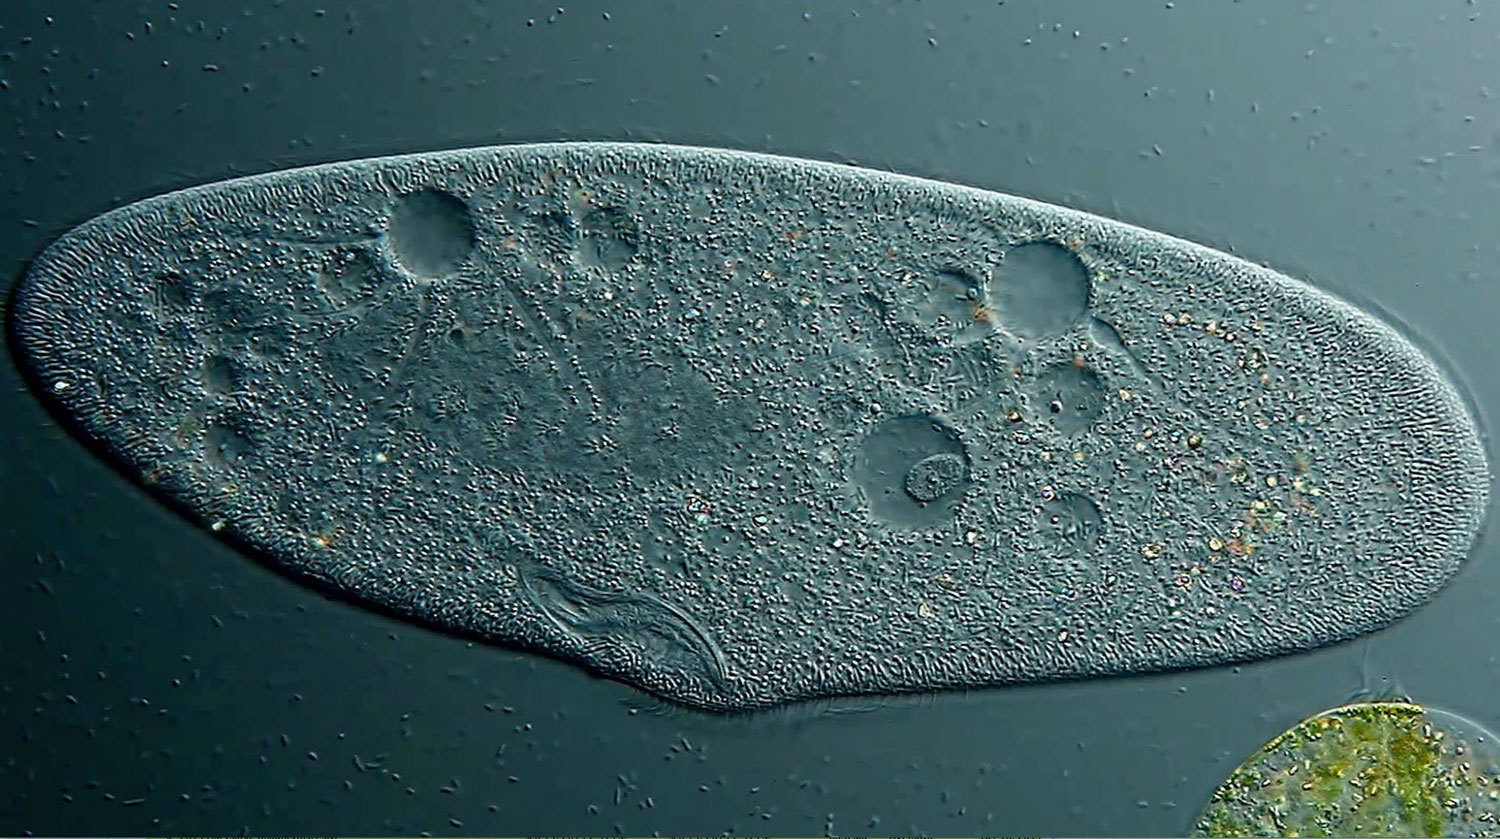 Paramecium, showing contactile vacuole and ciliary motion.